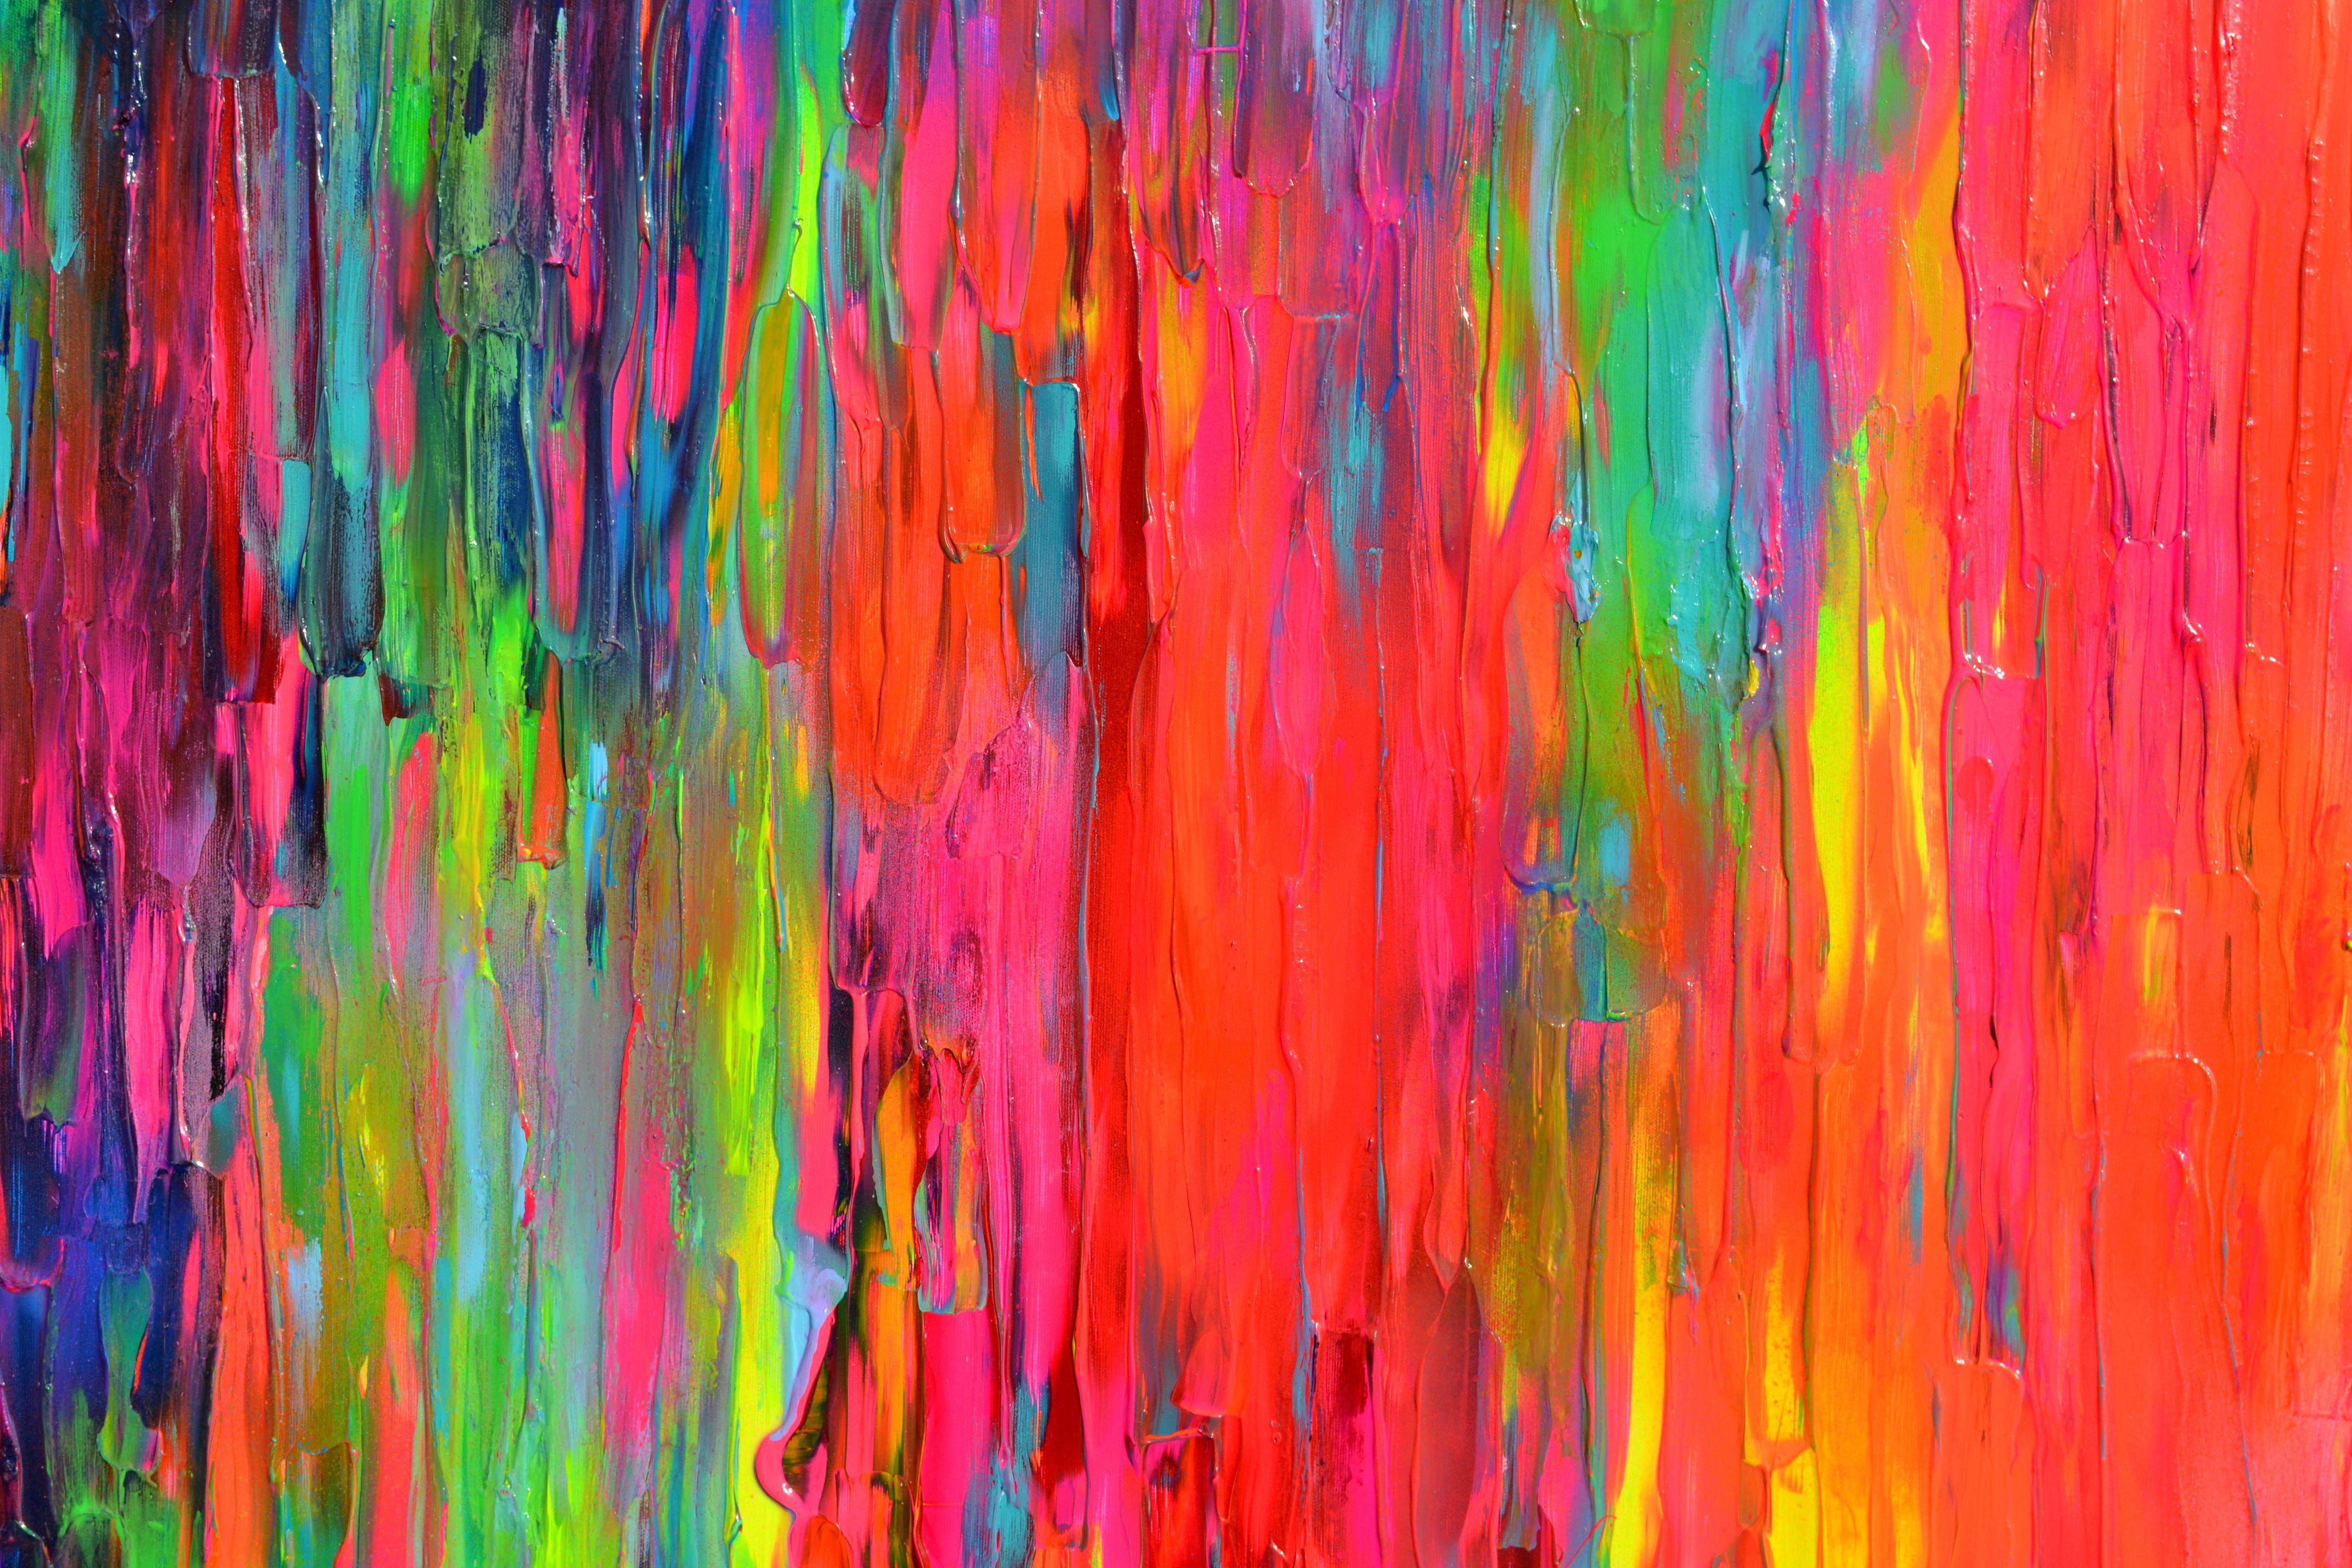 READY TO HANG - GALLERY QUALITY - FREE SHIPPING  It's all about colors, happiness and freedom!  A very beautiful, vibrant, bold, colourful textured large abstract painting, it can be the focal point of a large room. Tiberiu Soos use this strong neon